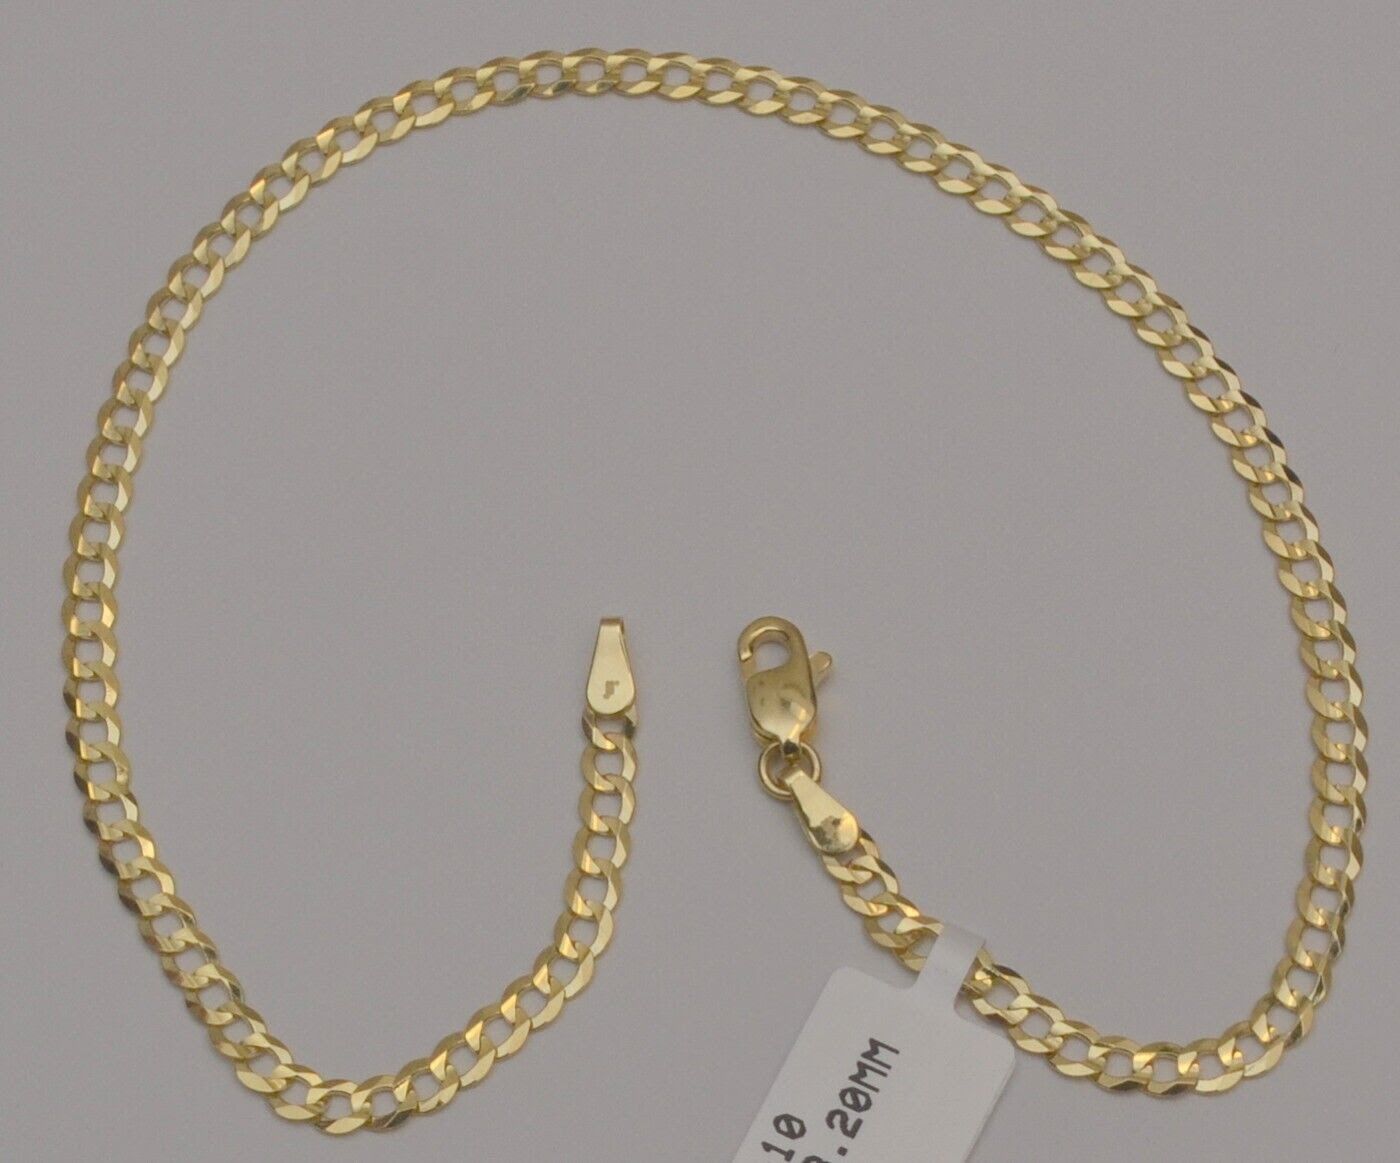 Gold chain 10k solid yellow cuban curb link anklet bracelet 10 in 3.2 mm 3.0 gr